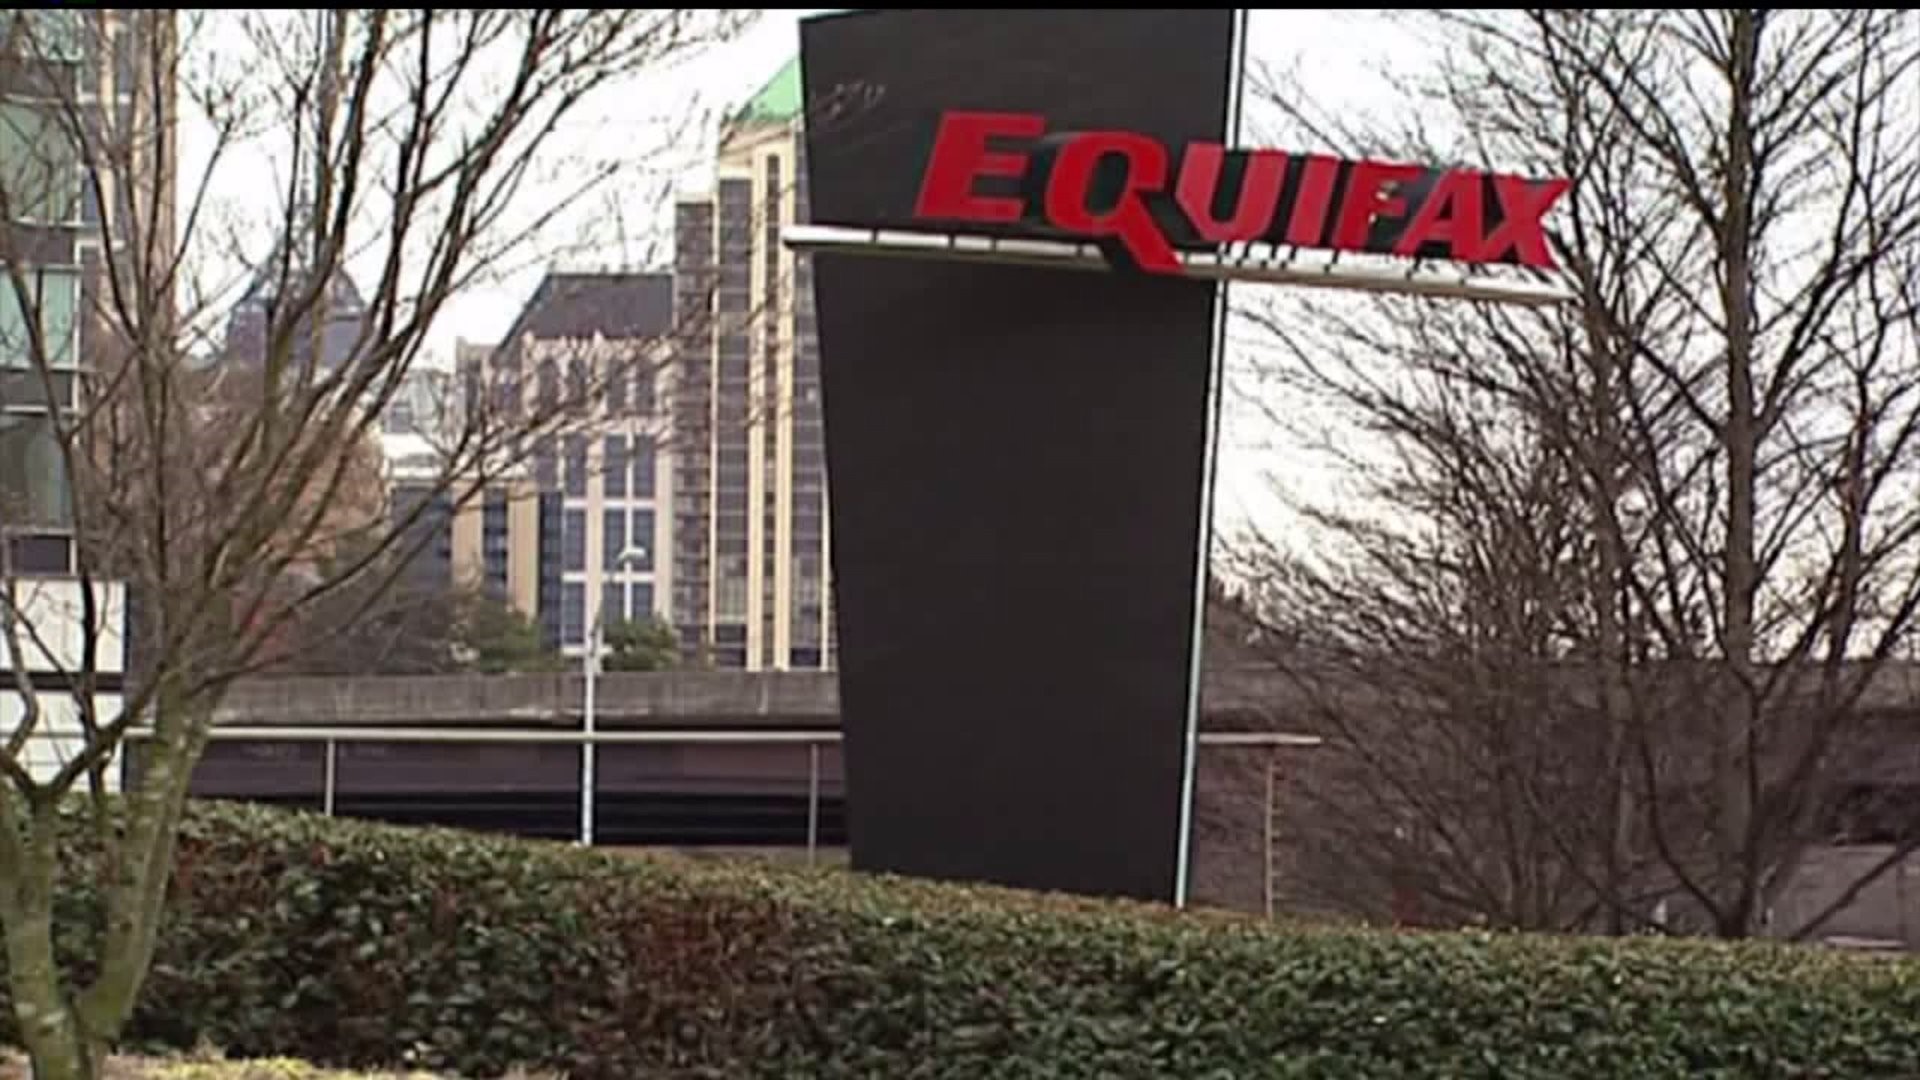 Here`s how to claim your money from the Equifax $700 million data breach settlement